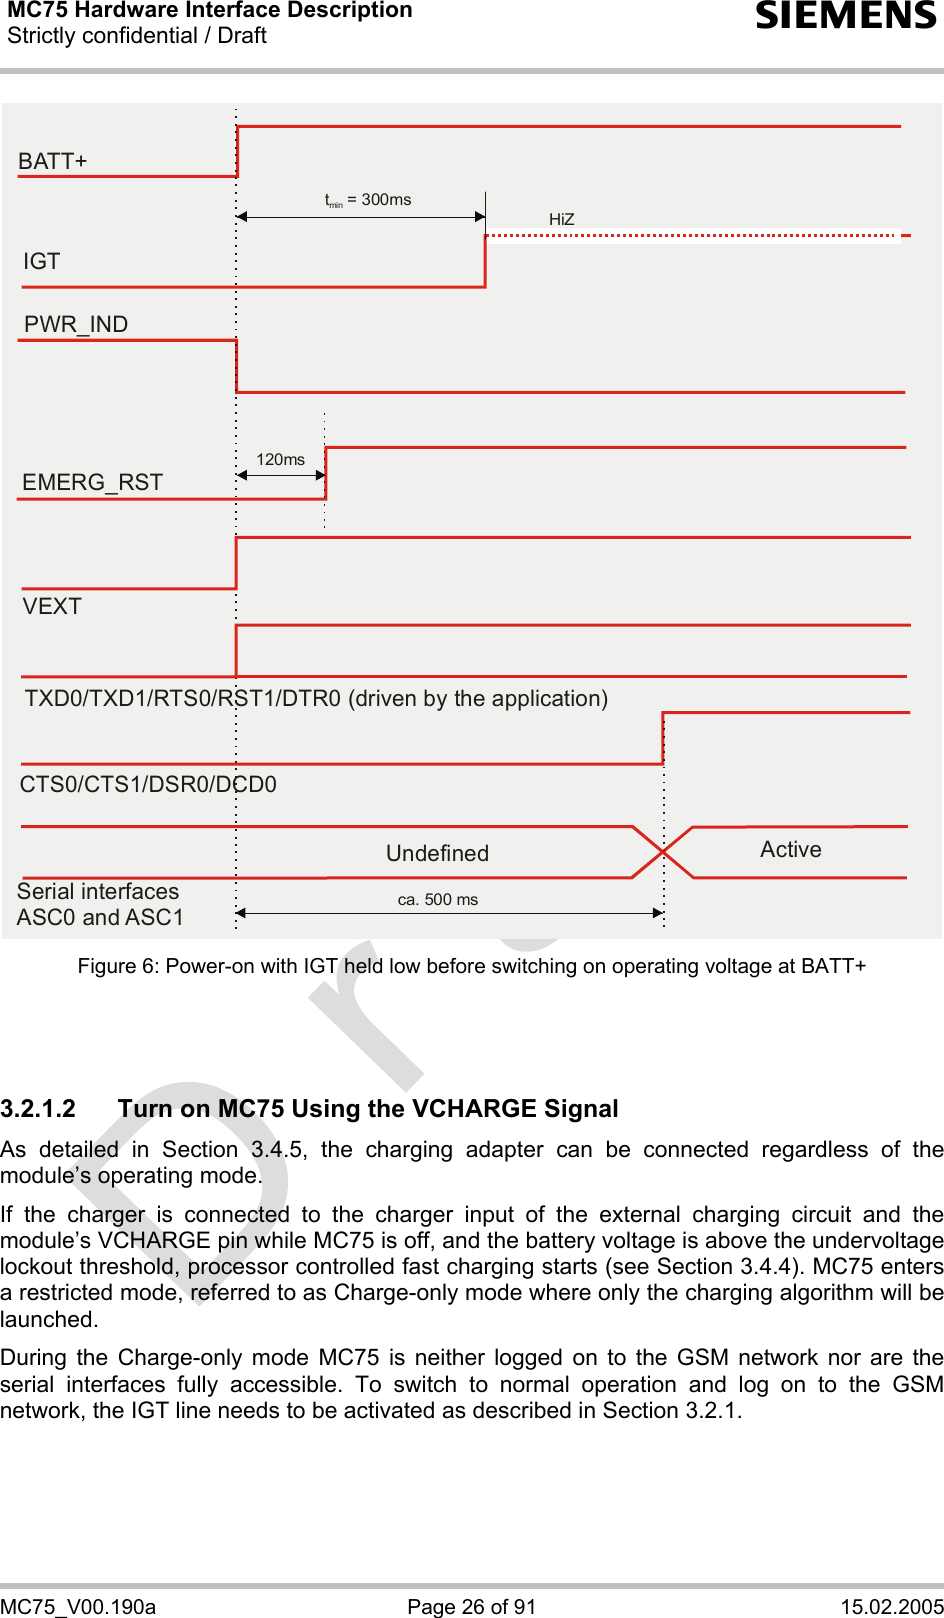 MC75 Hardware Interface Description Strictly confidential / Draft  s MC75_V00.190a  Page 26 of 91  15.02.2005 EMERG_RSTPWR_INDt  = 300msmin120msBATT+IGTHiZVEXTTXD0/TXD1/RTS0/RST1/DTR0 (driven by the application)CTS0/CTS1/DSR0/DCD0ca. 500 msSerial interfacesASC0 and ASC1Undefined Active Figure 6: Power-on with IGT held low before switching on operating voltage at BATT+    3.2.1.2  Turn on MC75 Using the VCHARGE Signal As detailed in Section 3.4.5, the charging adapter can be connected regardless of the module’s operating mode. If the charger is connected to the charger input of the external charging circuit and the module’s VCHARGE pin while MC75 is off, and the battery voltage is above the undervoltage lockout threshold, processor controlled fast charging starts (see Section 3.4.4). MC75 enters a restricted mode, referred to as Charge-only mode where only the charging algorithm will be launched. During the Charge-only mode MC75 is neither logged on to the GSM network nor are the serial interfaces fully accessible. To switch to normal operation and log on to the GSM network, the IGT line needs to be activated as described in Section 3.2.1.   